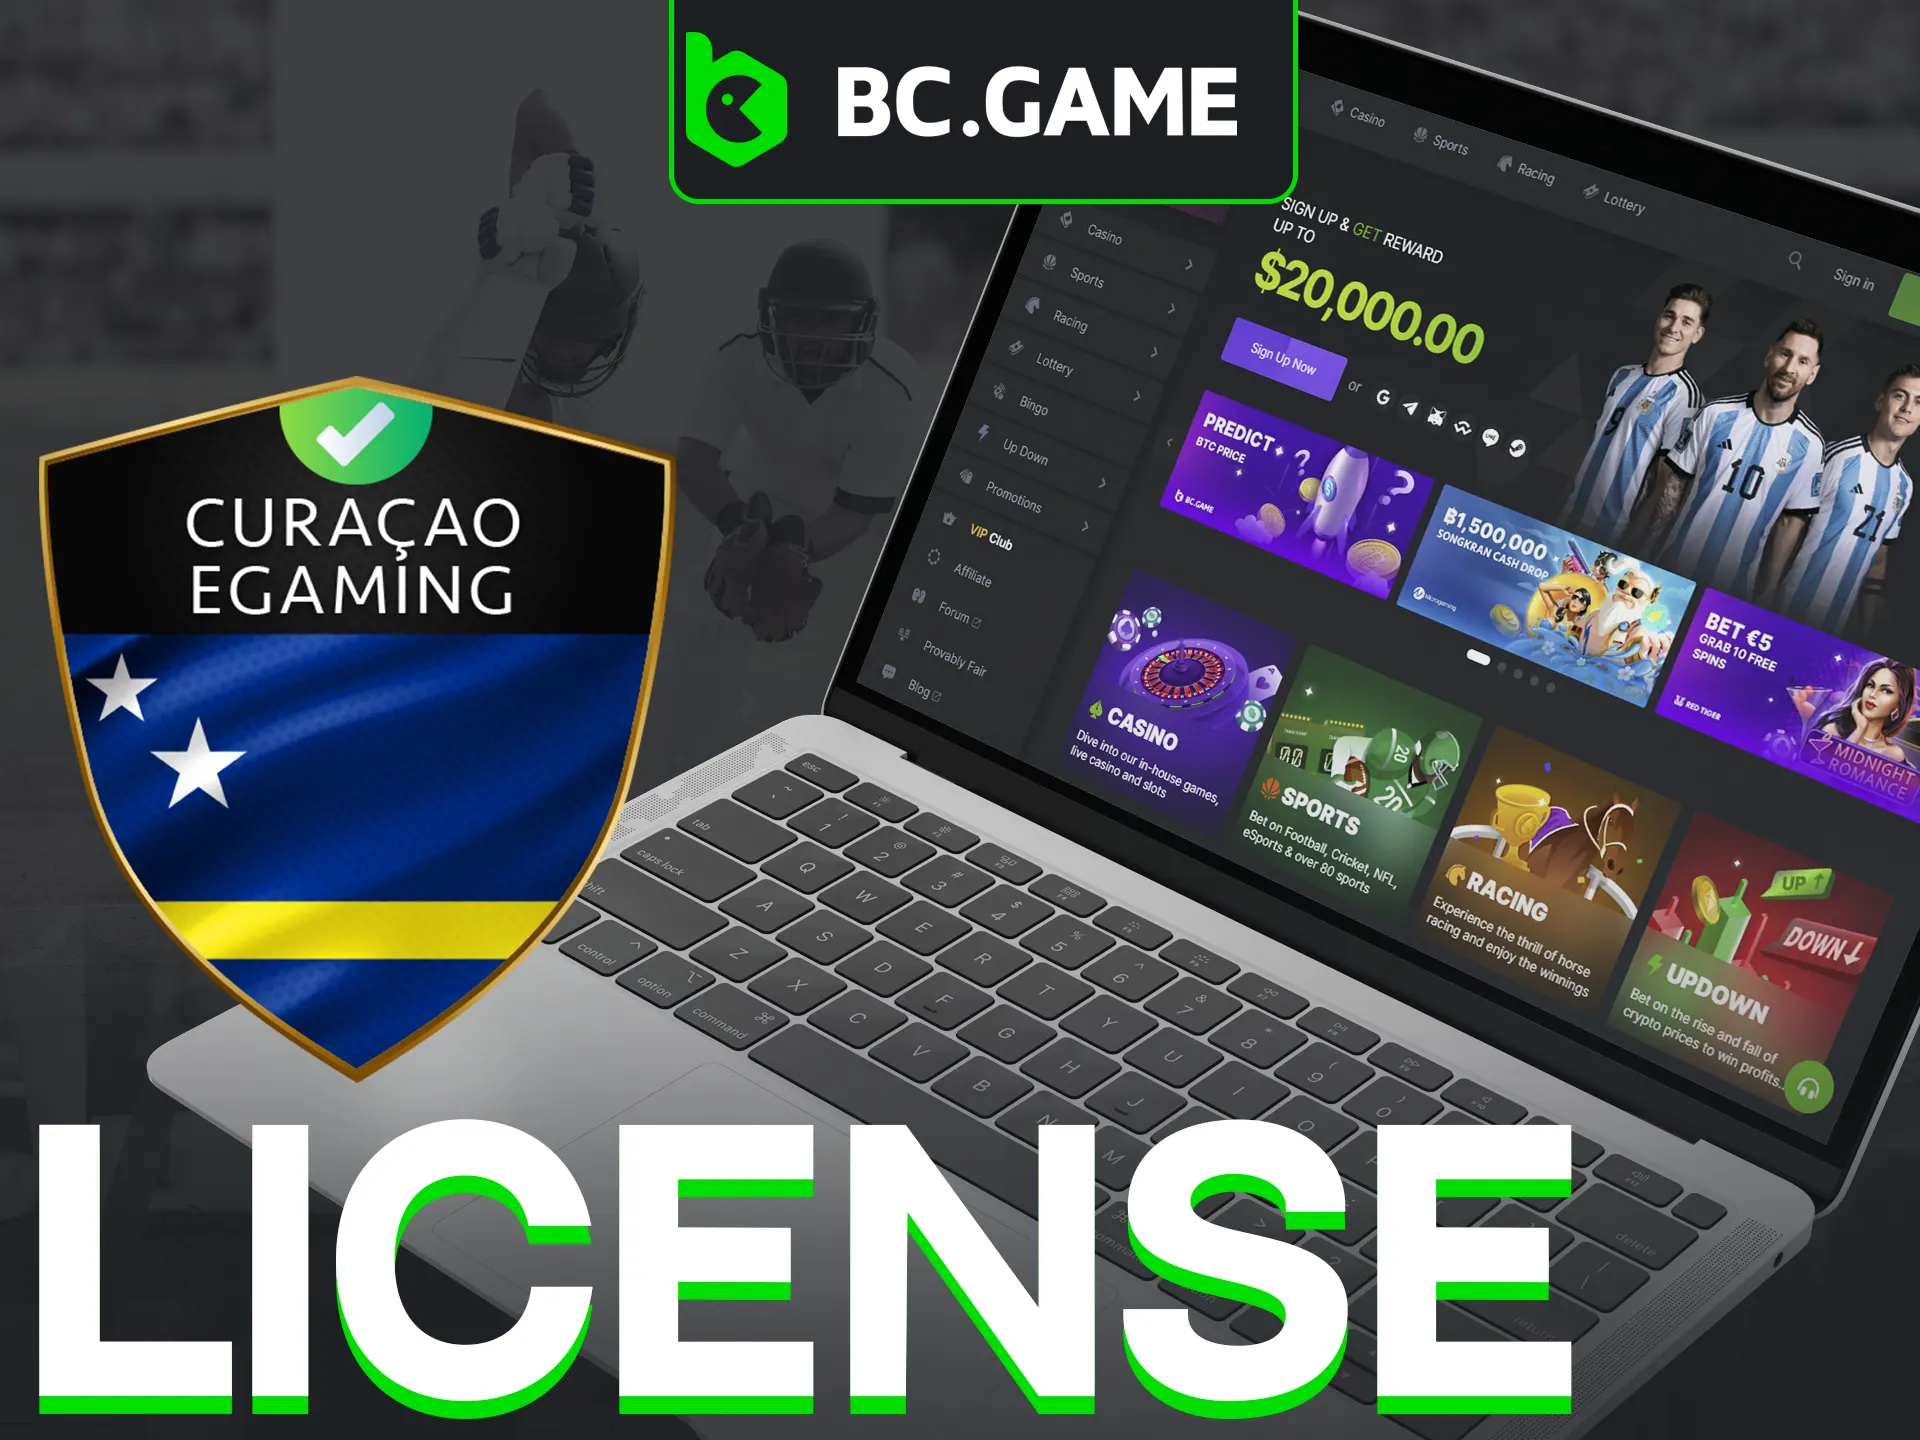 BC game is licensed by Curacao, which ensures a reliable and safe betting and gambling experience.